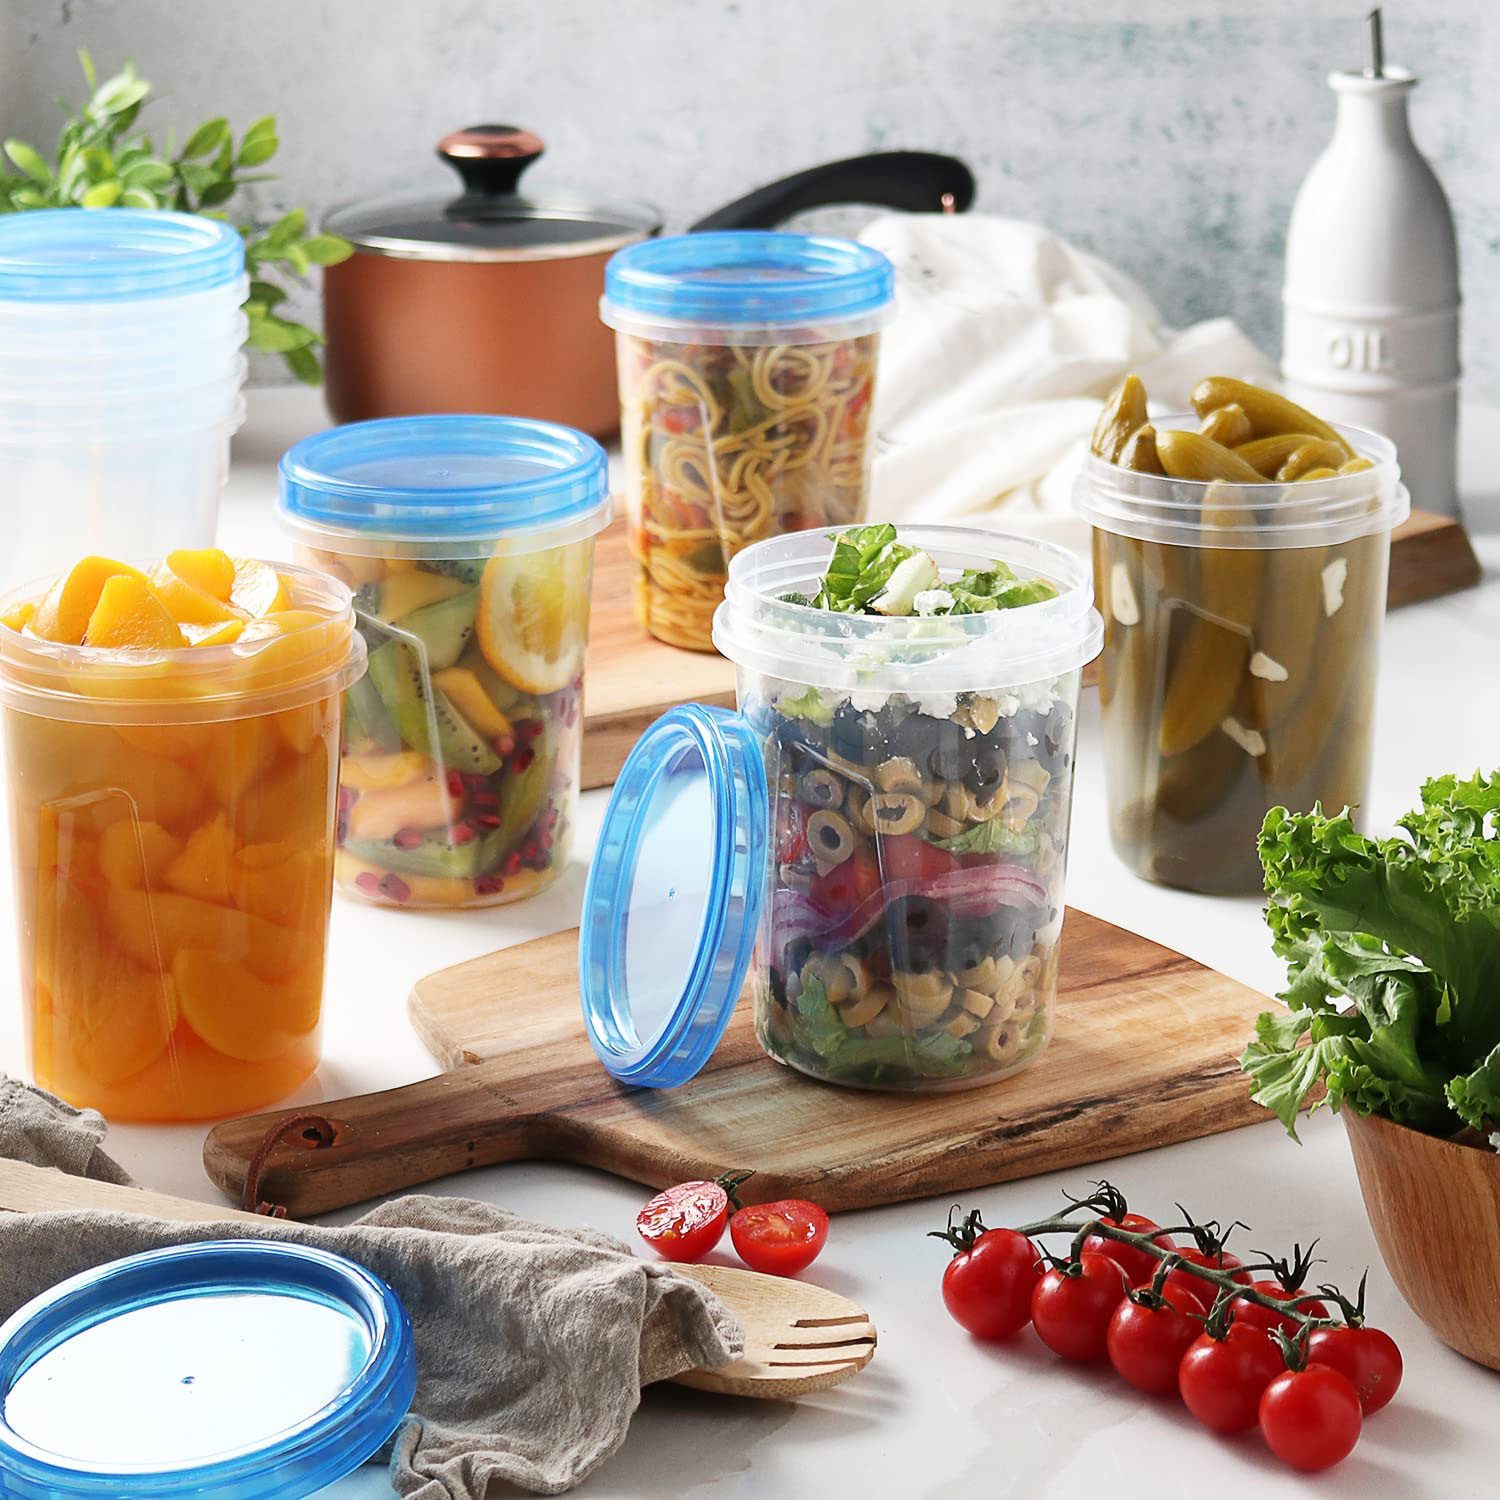 The Best Containers for Freezing Food On The Market – Souper Cubes®